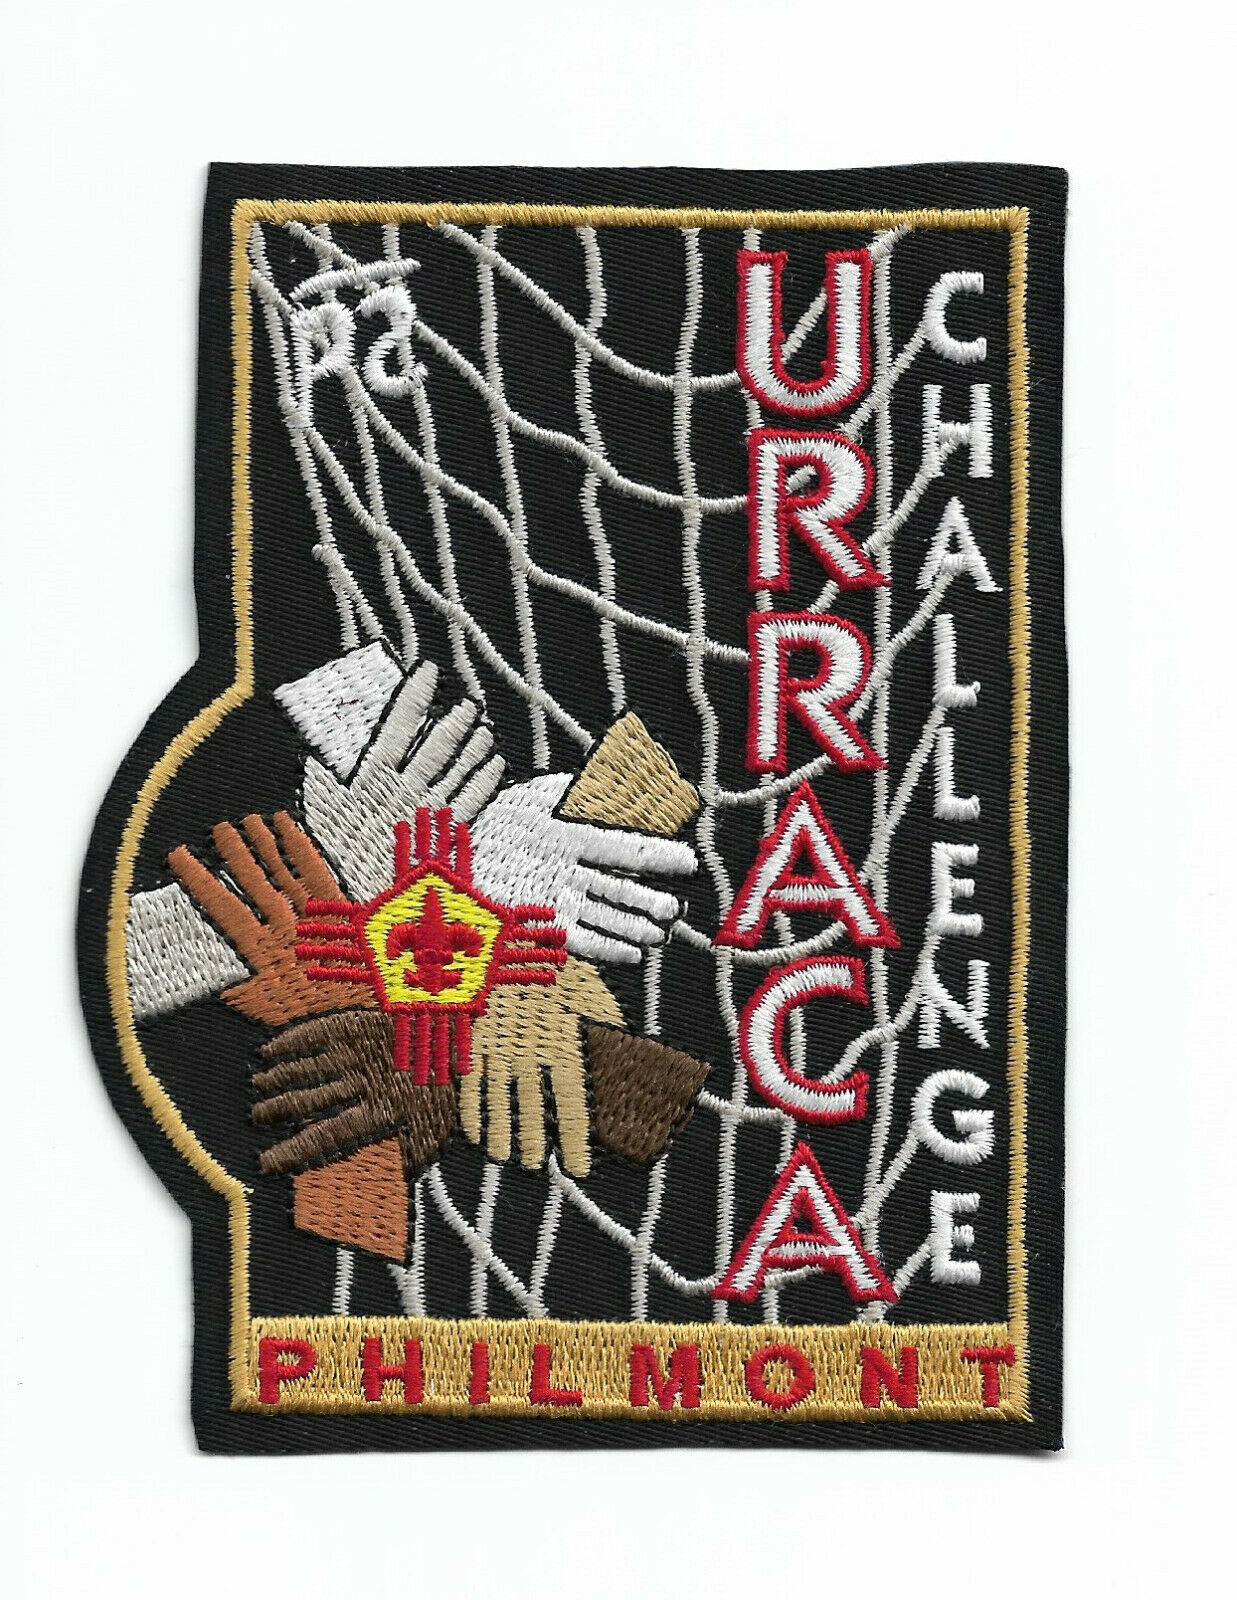 Philmont Scout Ranch * Urraca Camp Patch # 1  * 3 1/4 Inch By 4 1/4 Inch